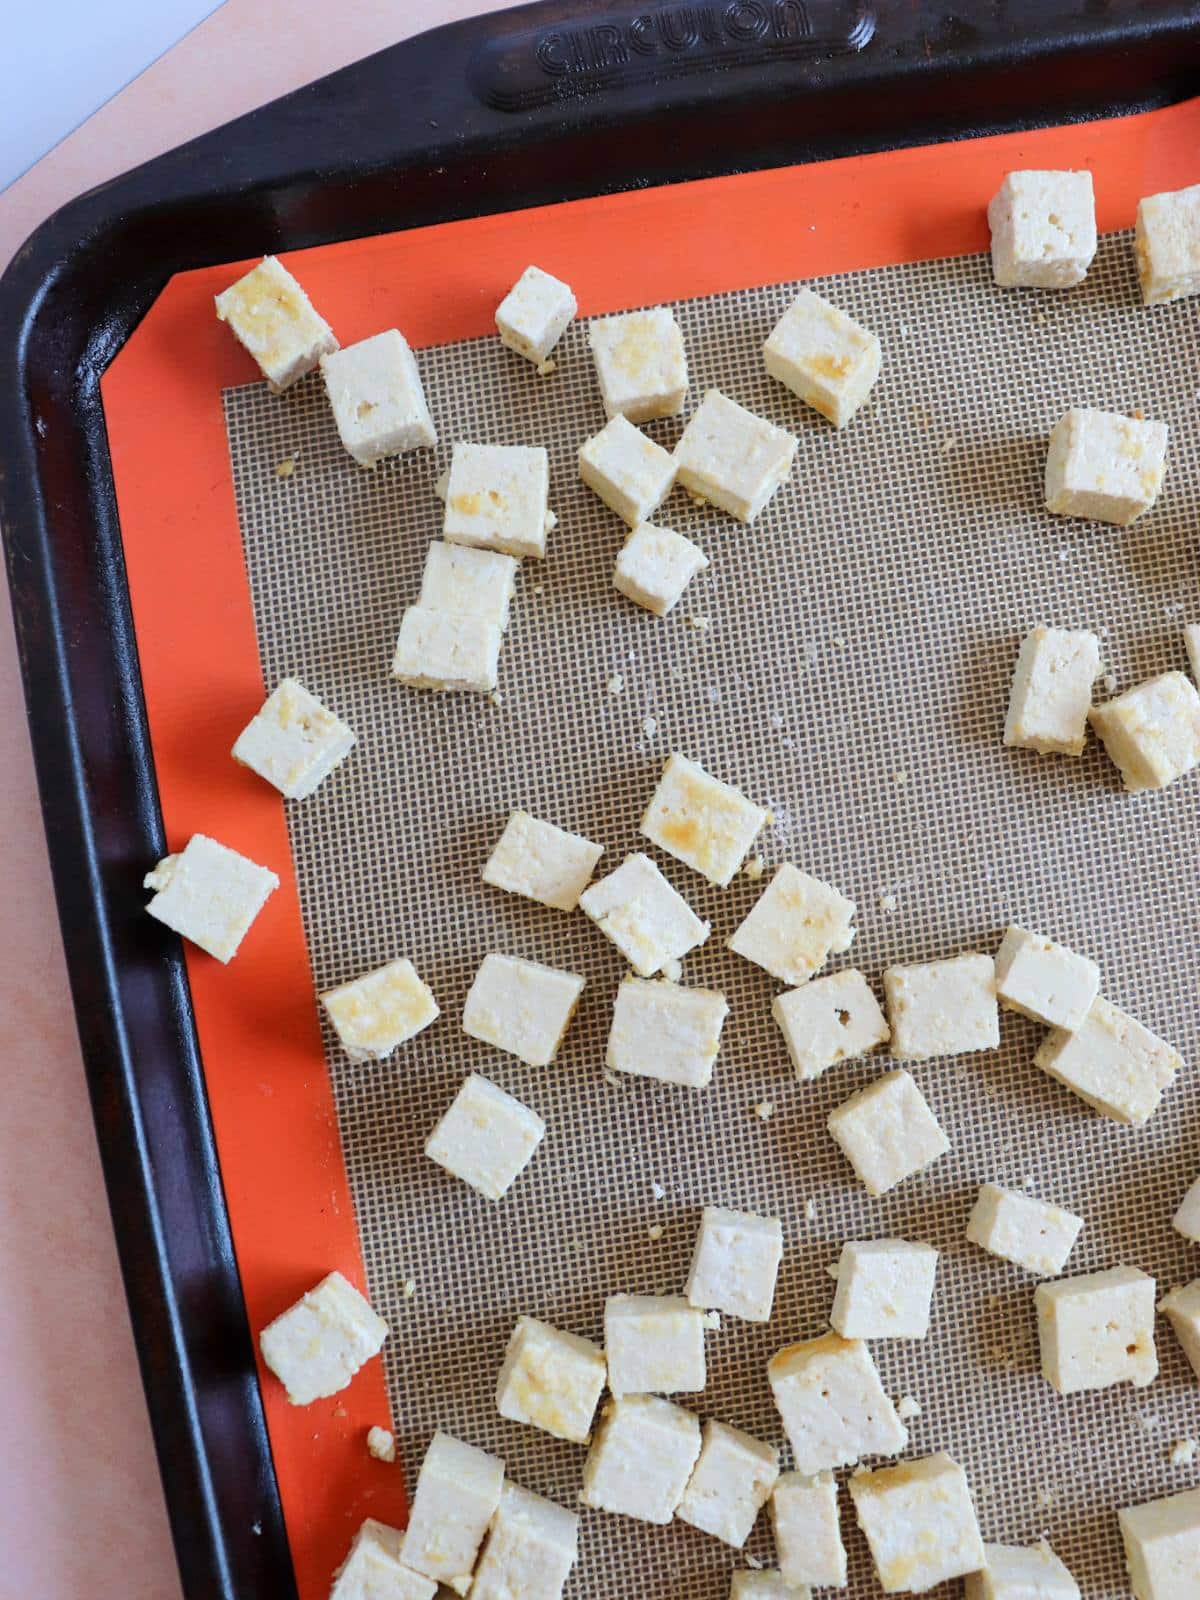 Tofu cubes on a lined baking sheet.